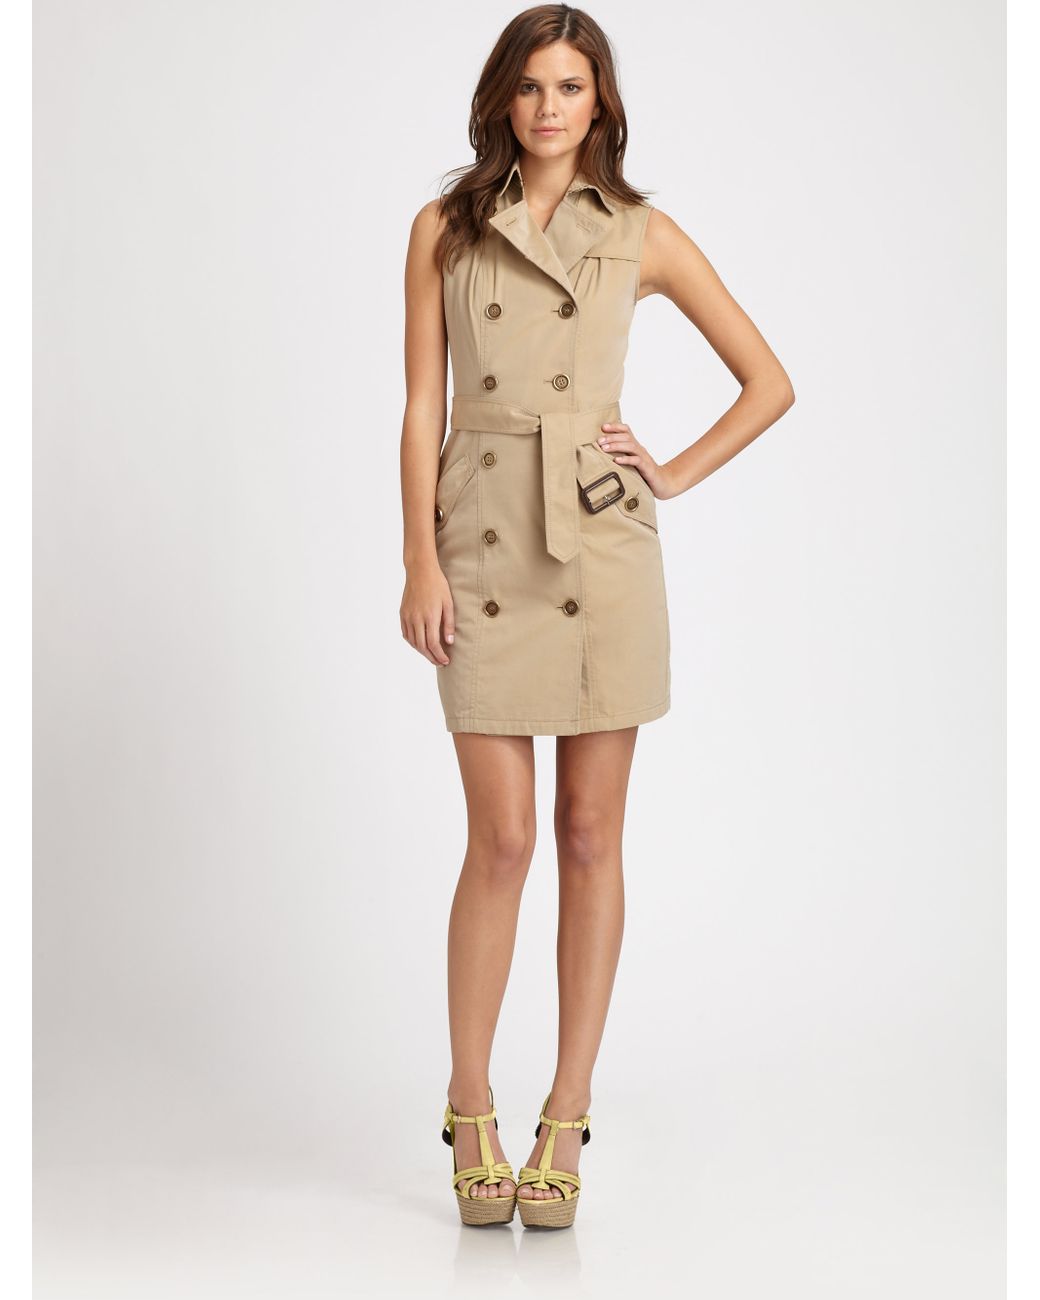 Burberry Brit Daya Sleeveless Trench Dress in Natural | Lyst